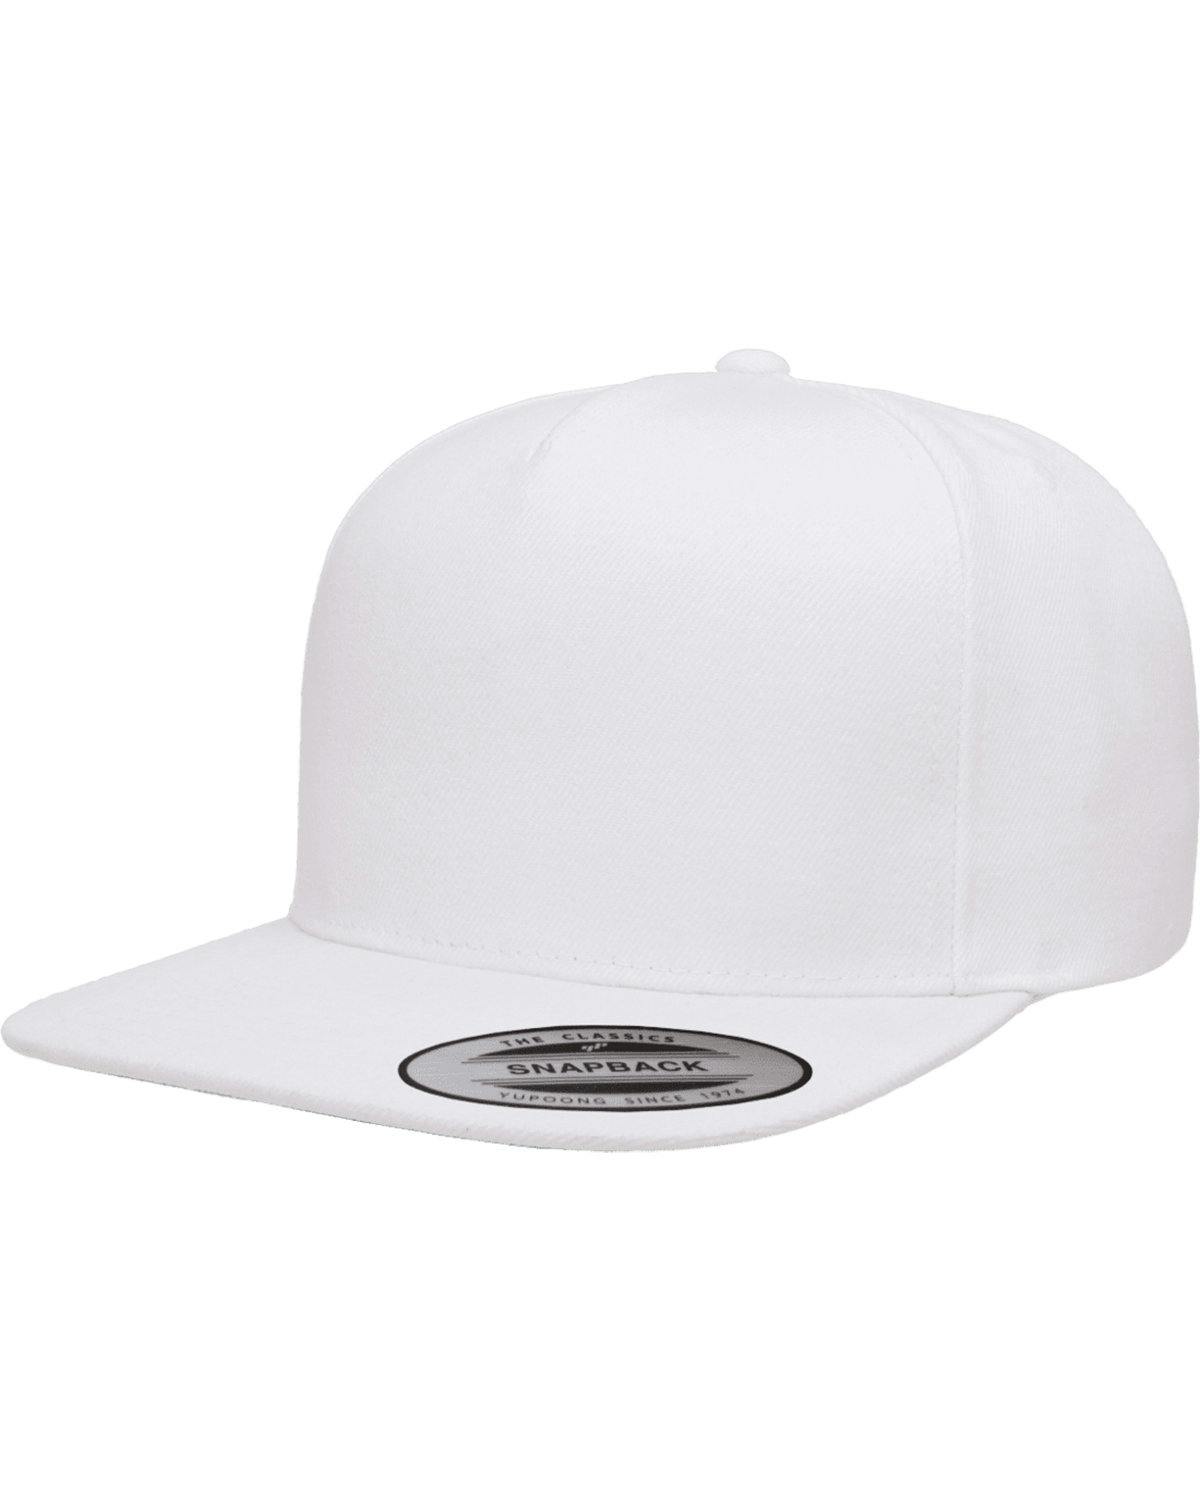 Image for Adult Structured Flat Visor Classic Snapback Cap